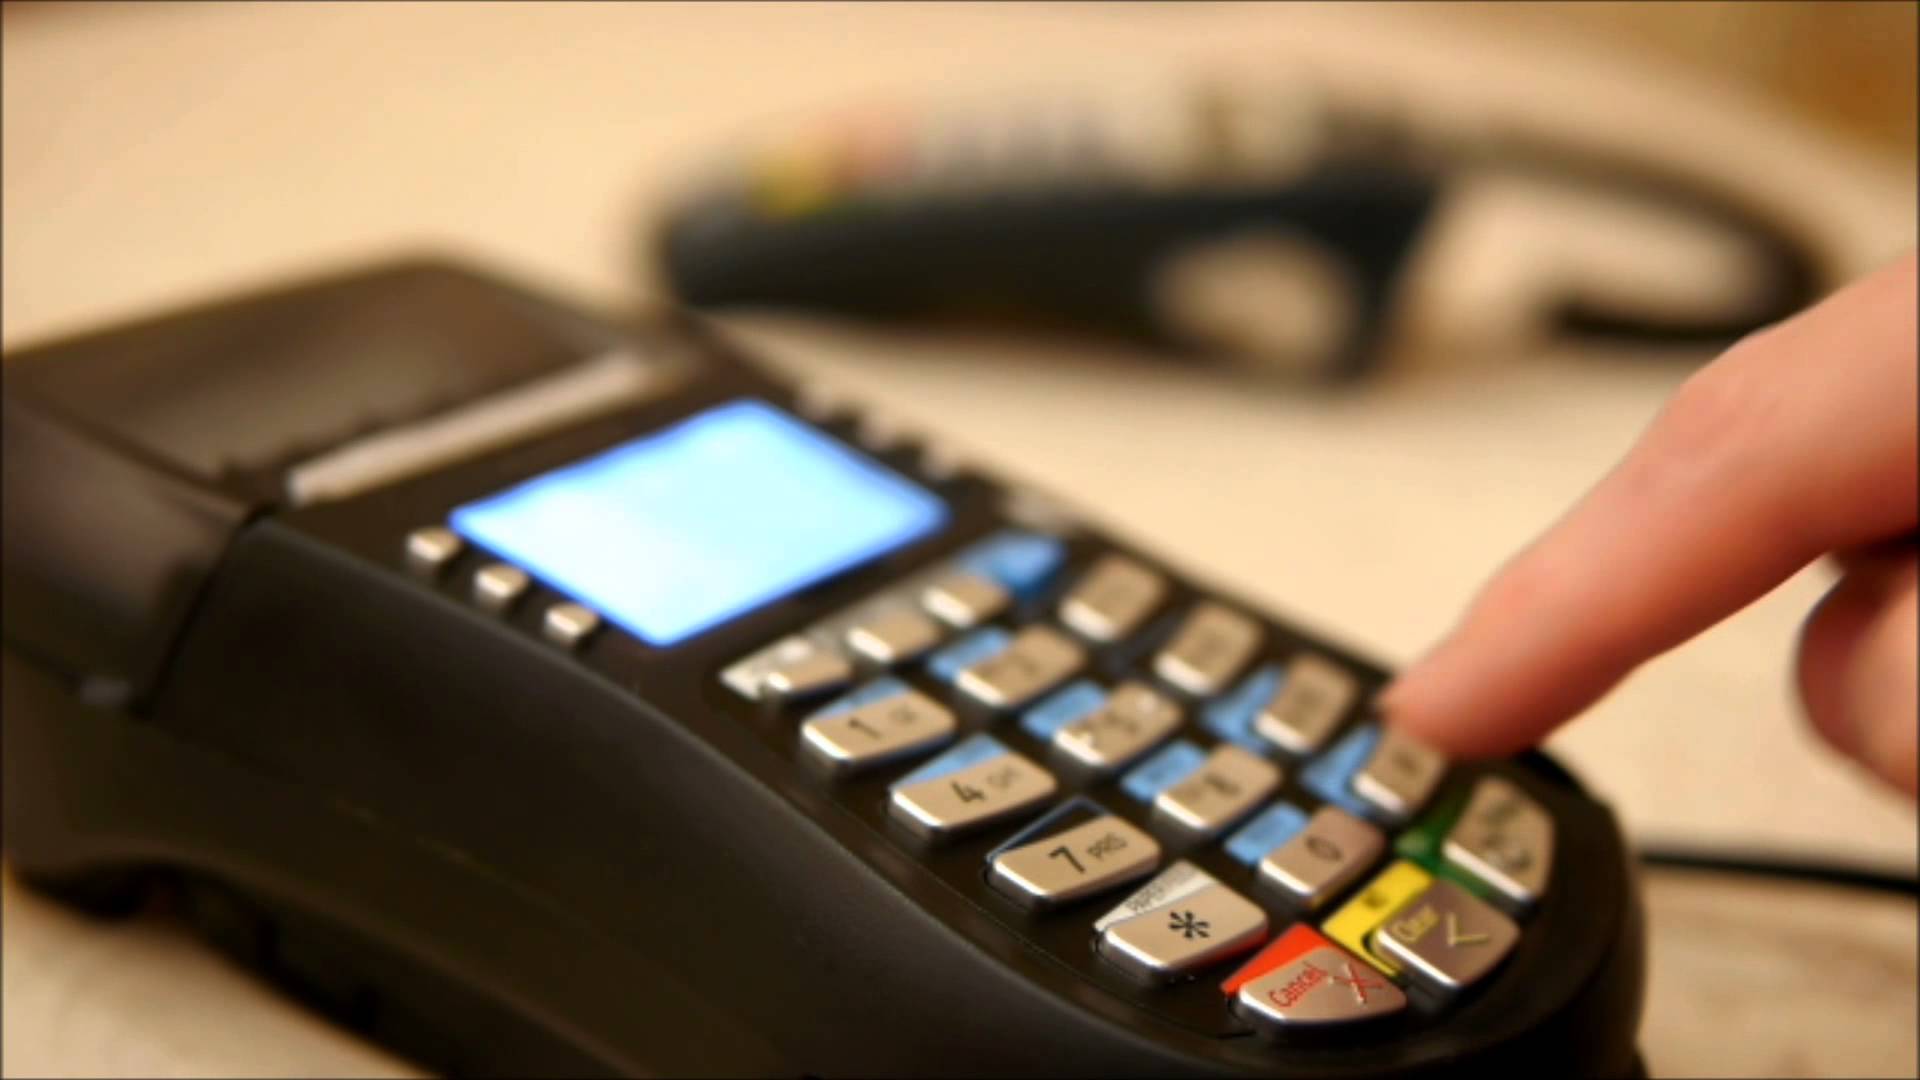 POS terminals mandatory for several goods and services in Greece